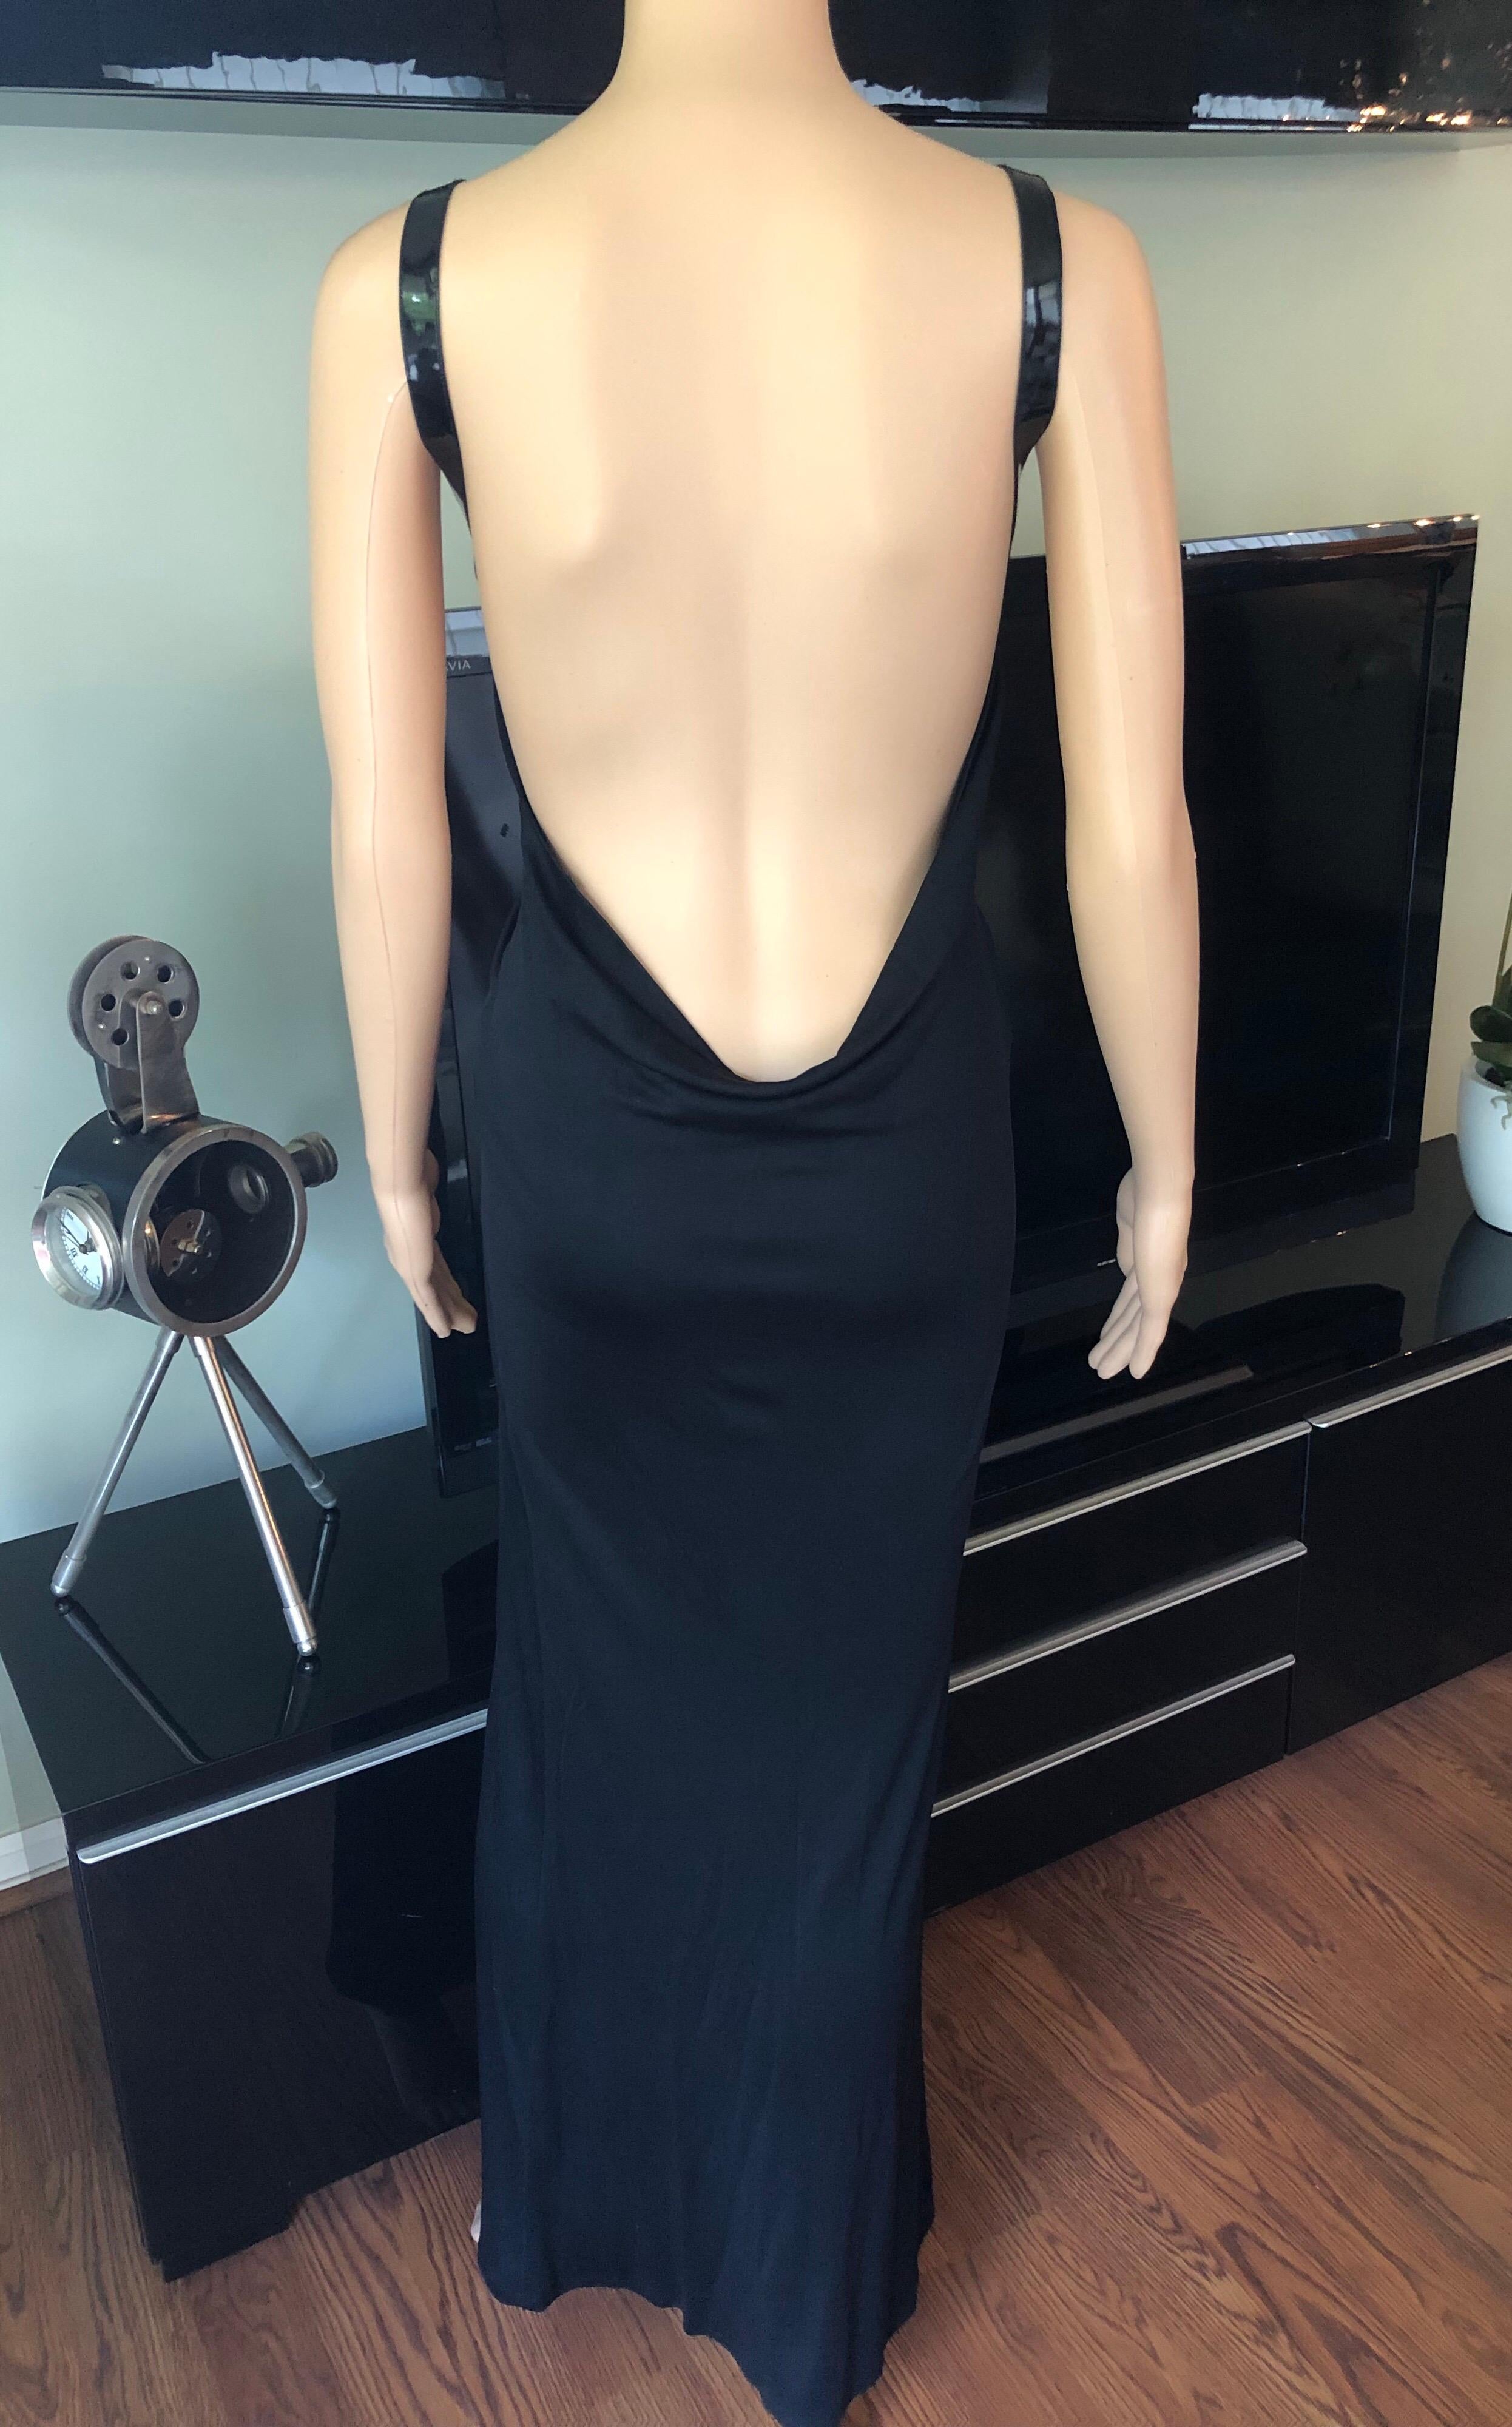 1999 Gucci by Tom Ford Silk Draped Open Back Black Dress Gown IT 40

Gucci silk sleeveless draped gown with scoop neck and gathers at back. 
